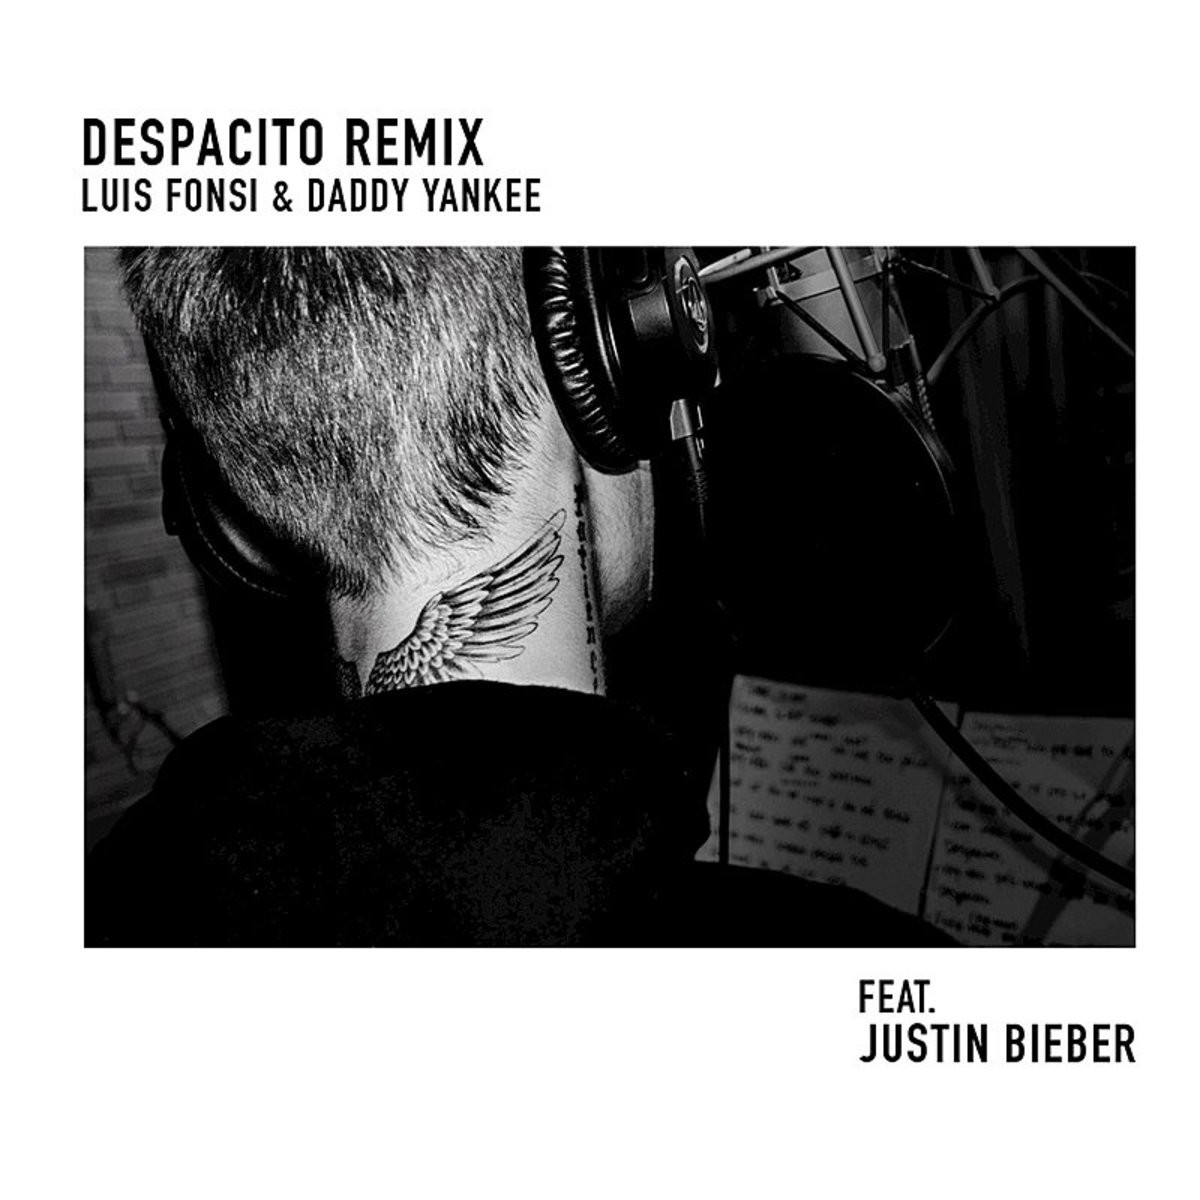 justin bieber songs download pagalworld mp3